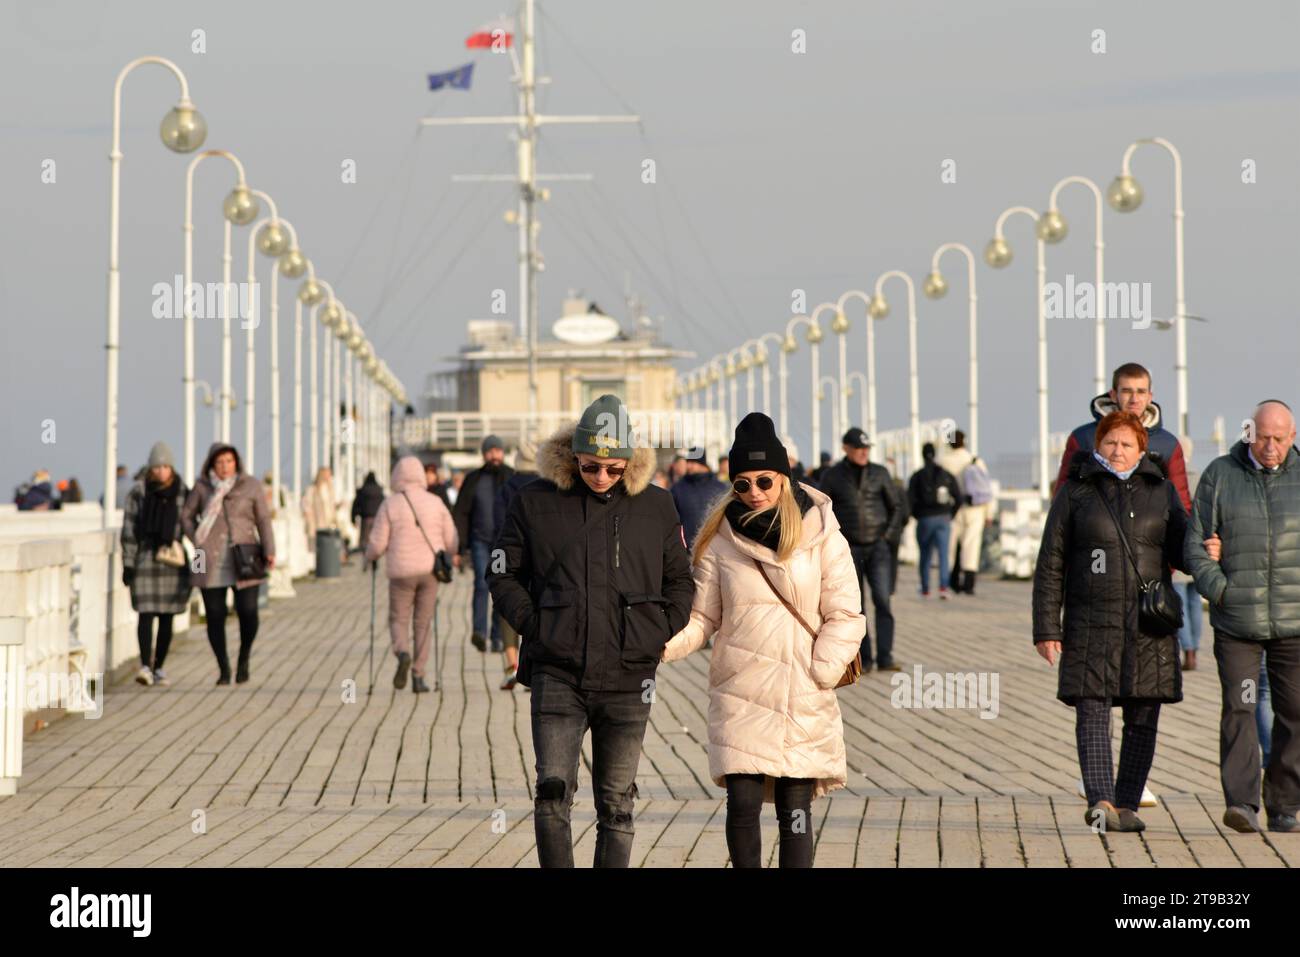 people, tourists, locals, jackets, cold weather, Winter, out of season, Sopot Pier, day out, Polish resort, Baltic Sea, town, city, Sopot, Poland Stock Photo